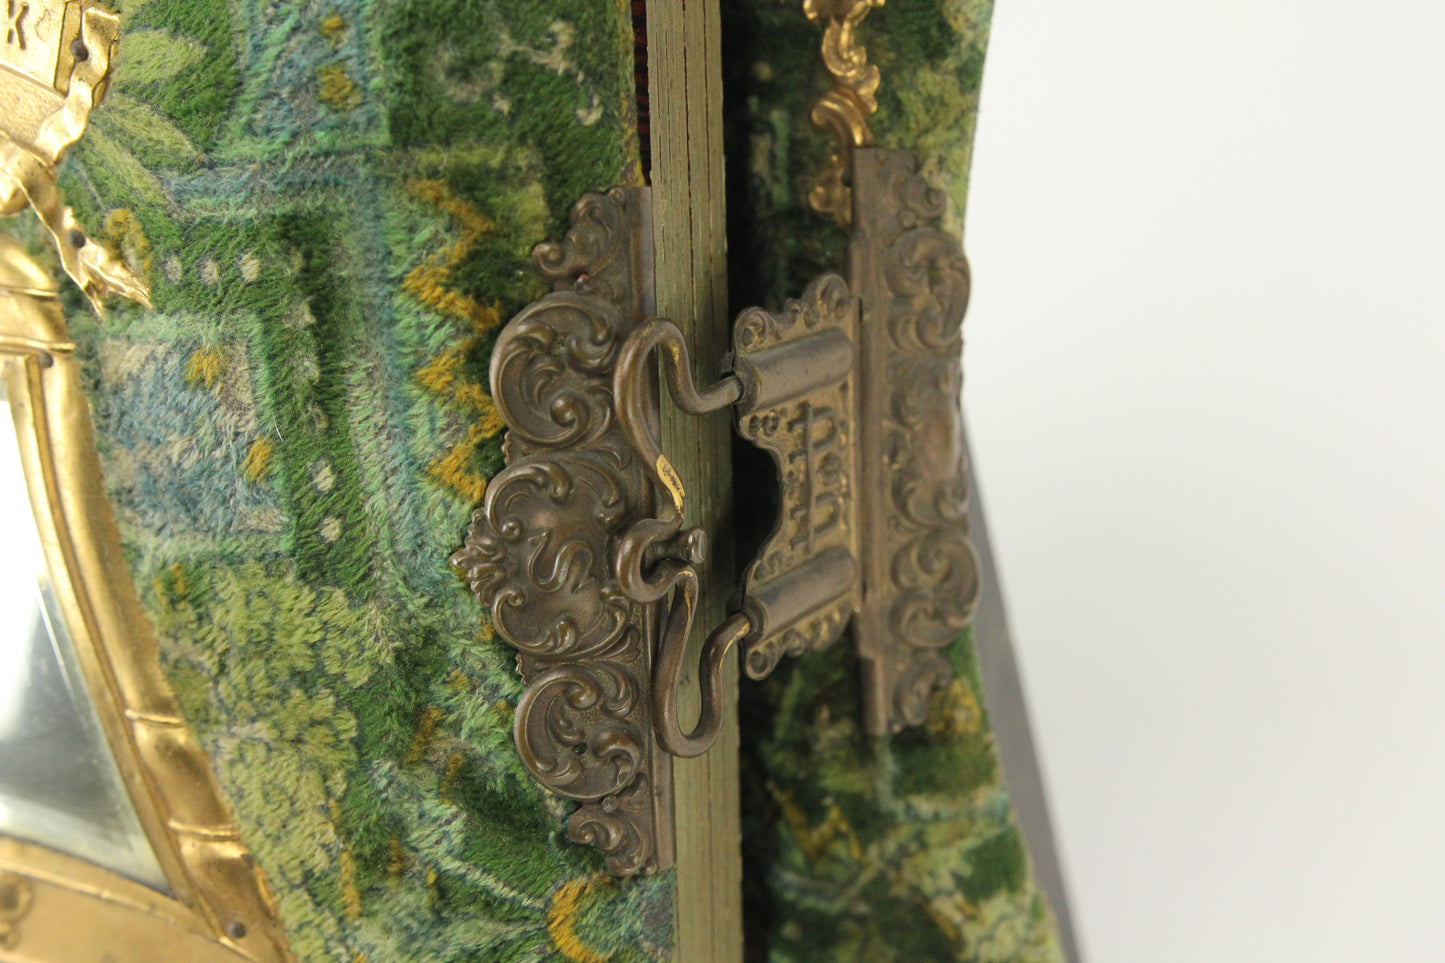 Victorian Liberty Bell Mirrored Green Fabric Covered Cabinet Card Photo Album